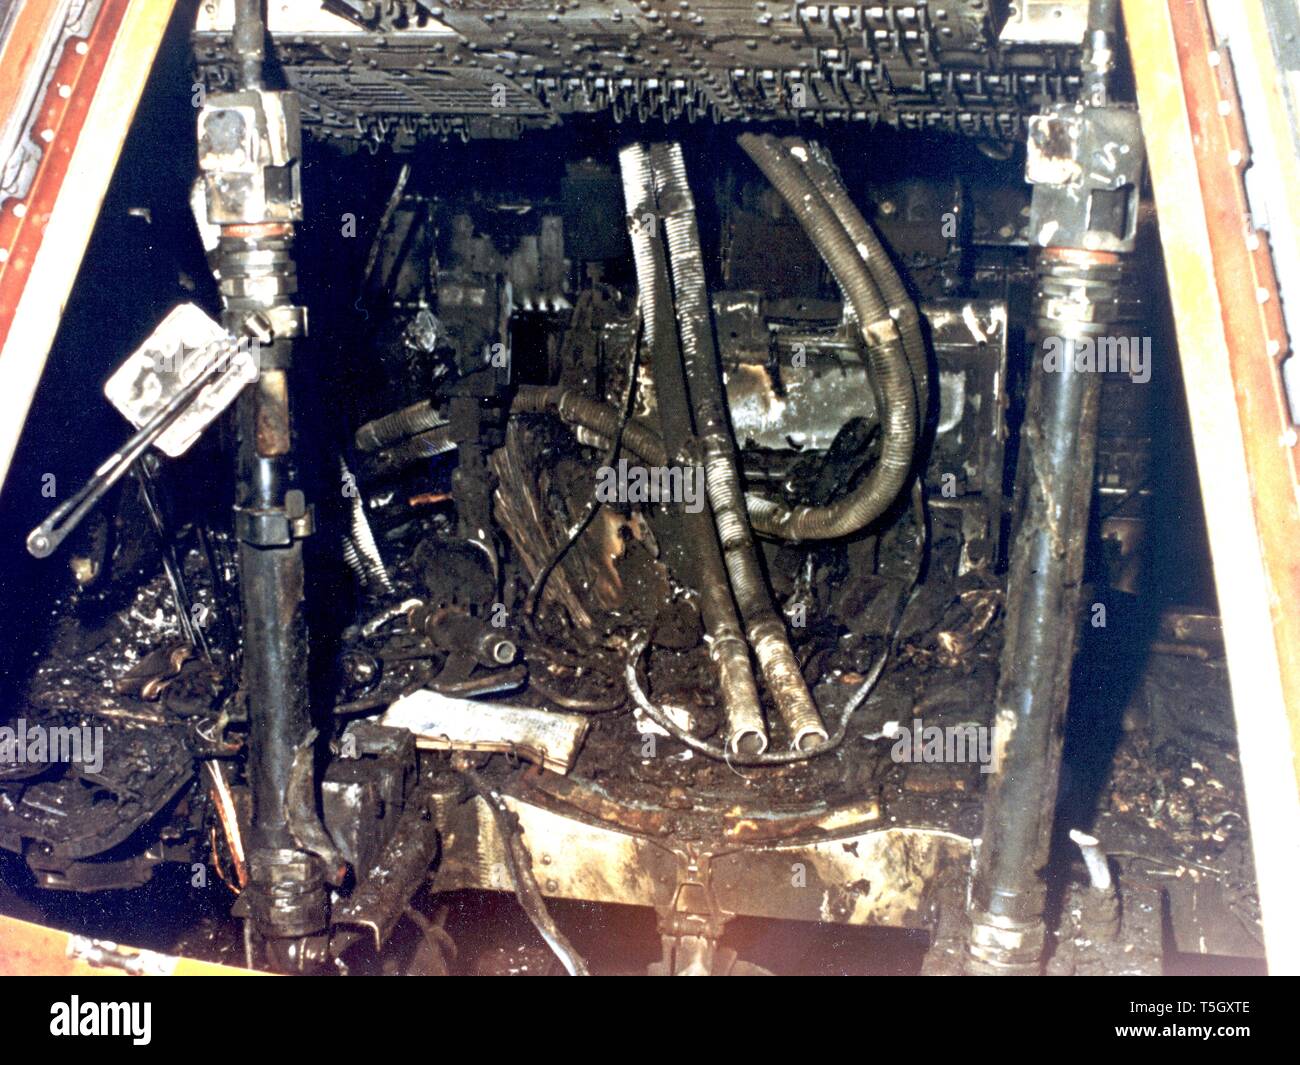 Close-up view of the Apollo 1 Command Module showing the effects of the flash fire which killed the prime crew during a routine training exercise, January 28, 1967. Image courtesy National Aeronautics and Space Administration (NASA). () Stock Photo